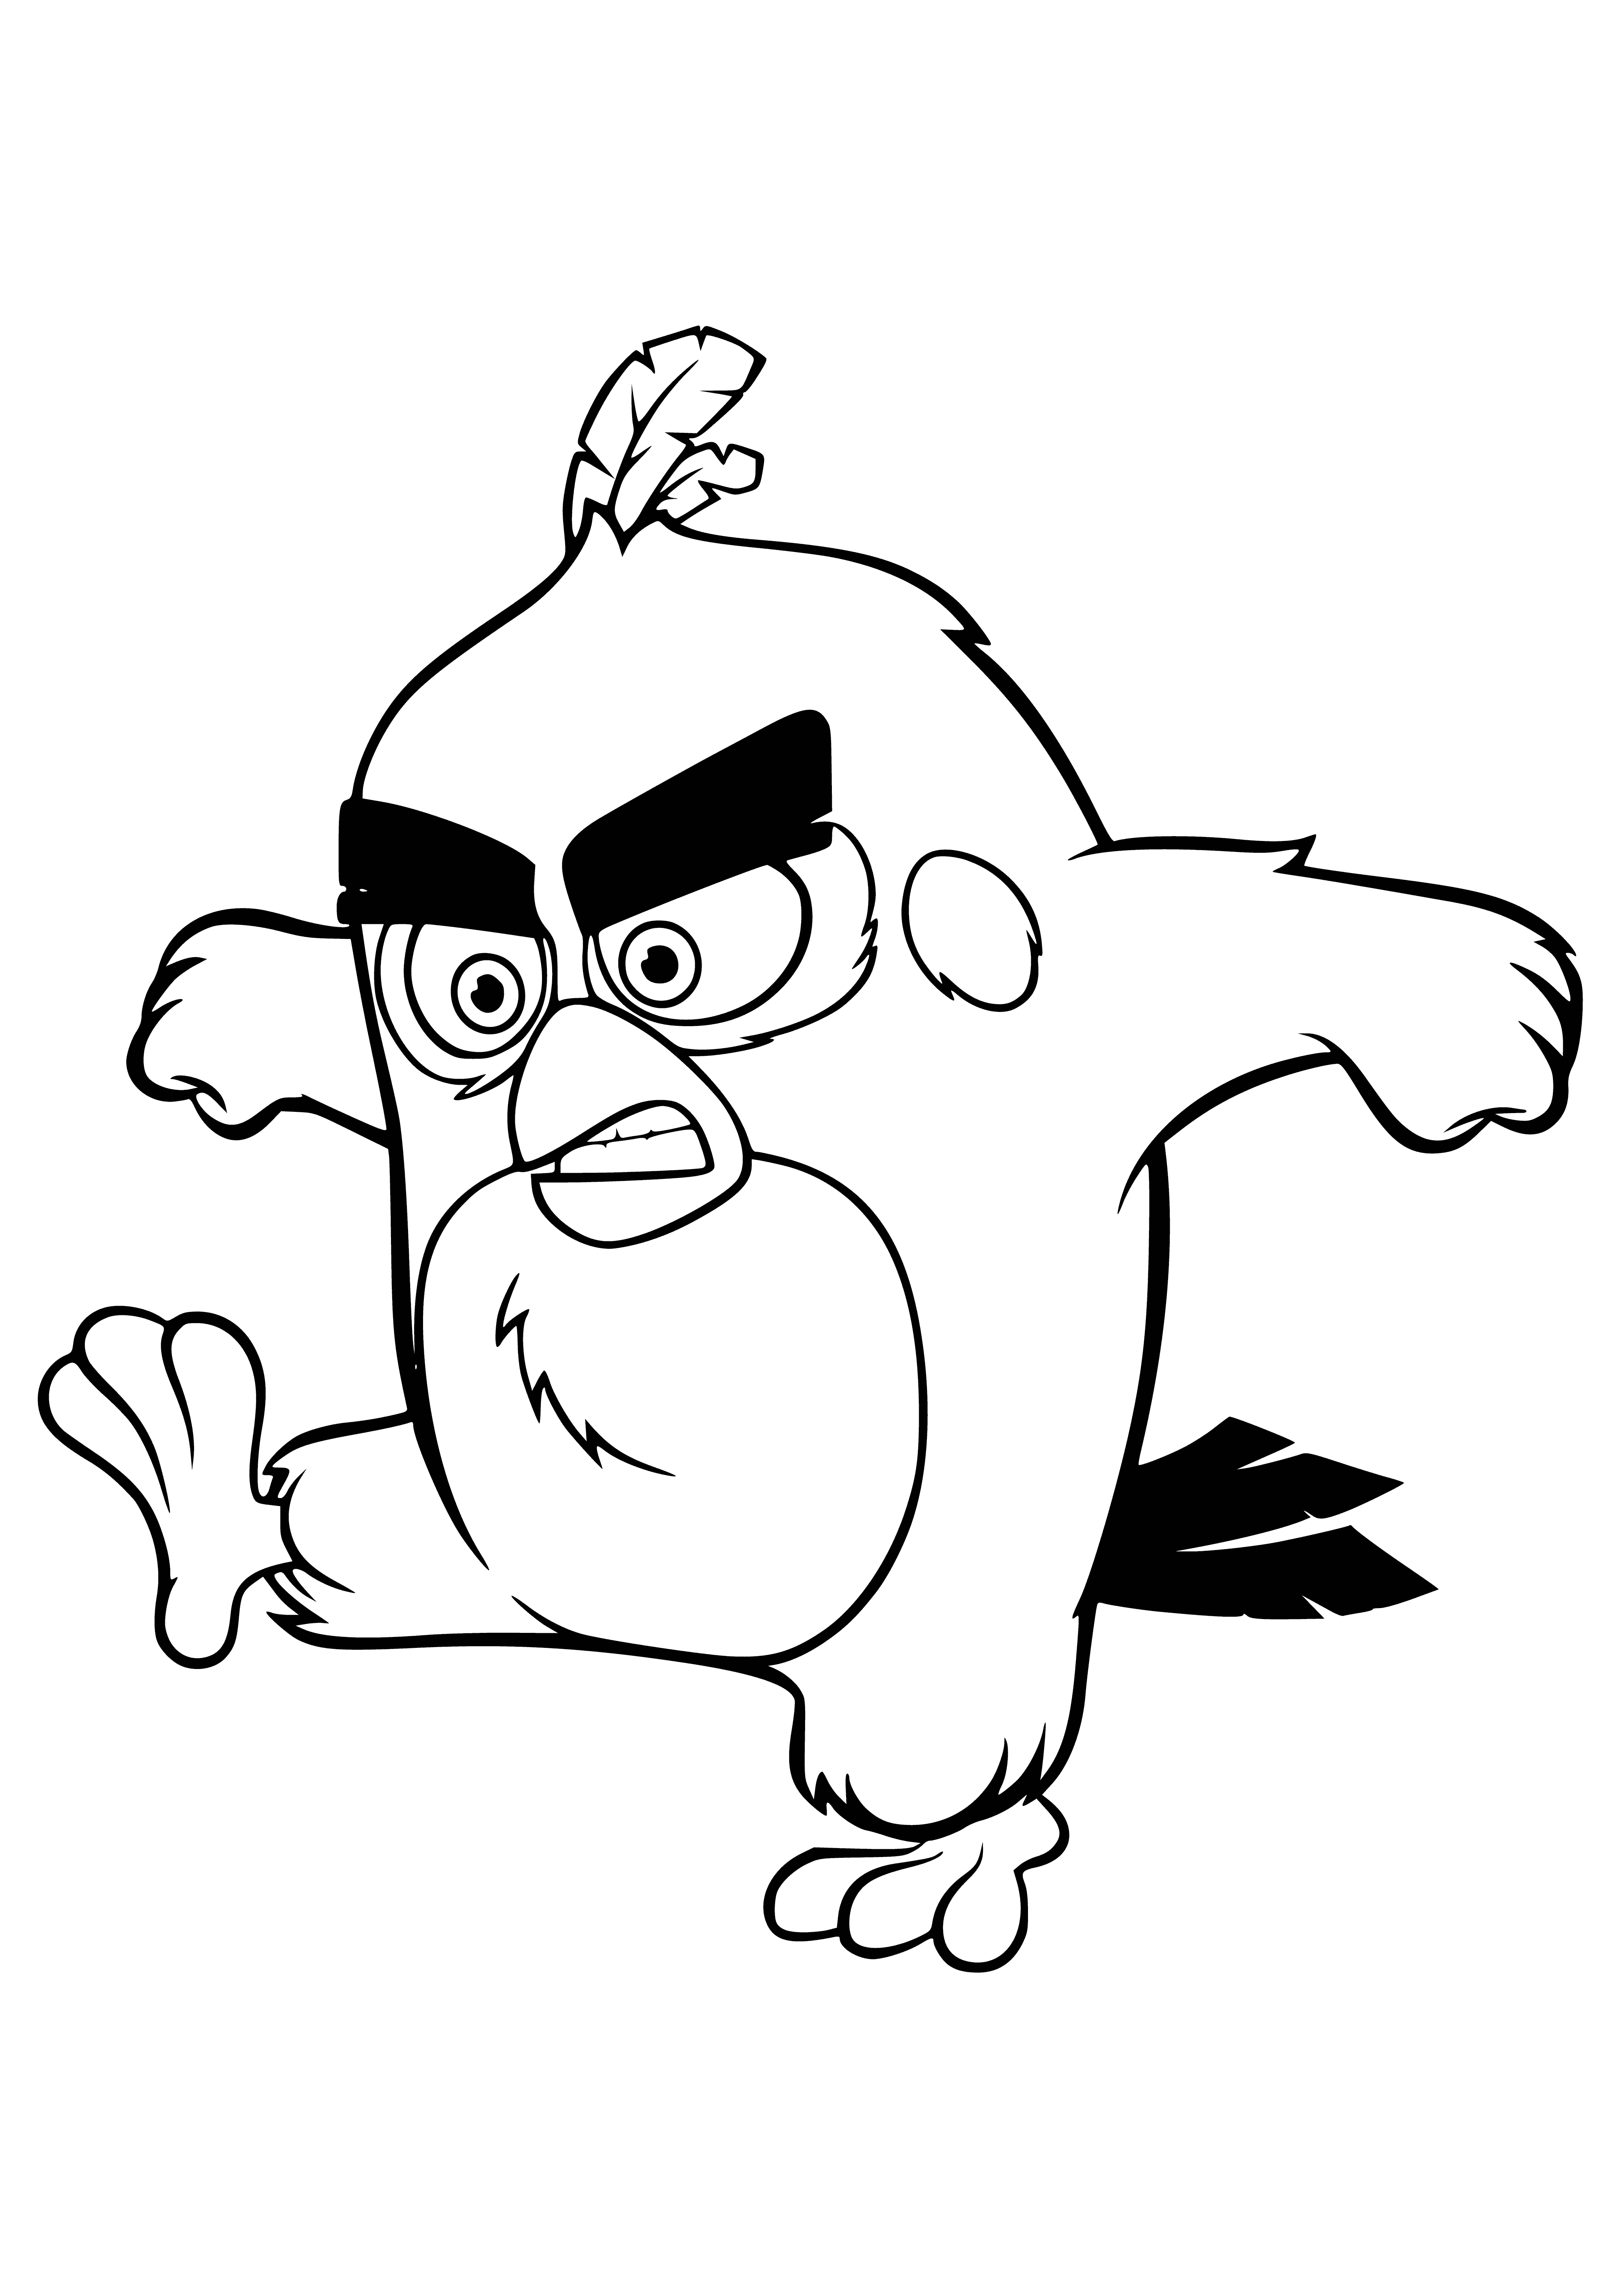 coloring page: Red is an angry bird ready to fight the green pigs. Wings out; ready to take them down! #AngryBirds.